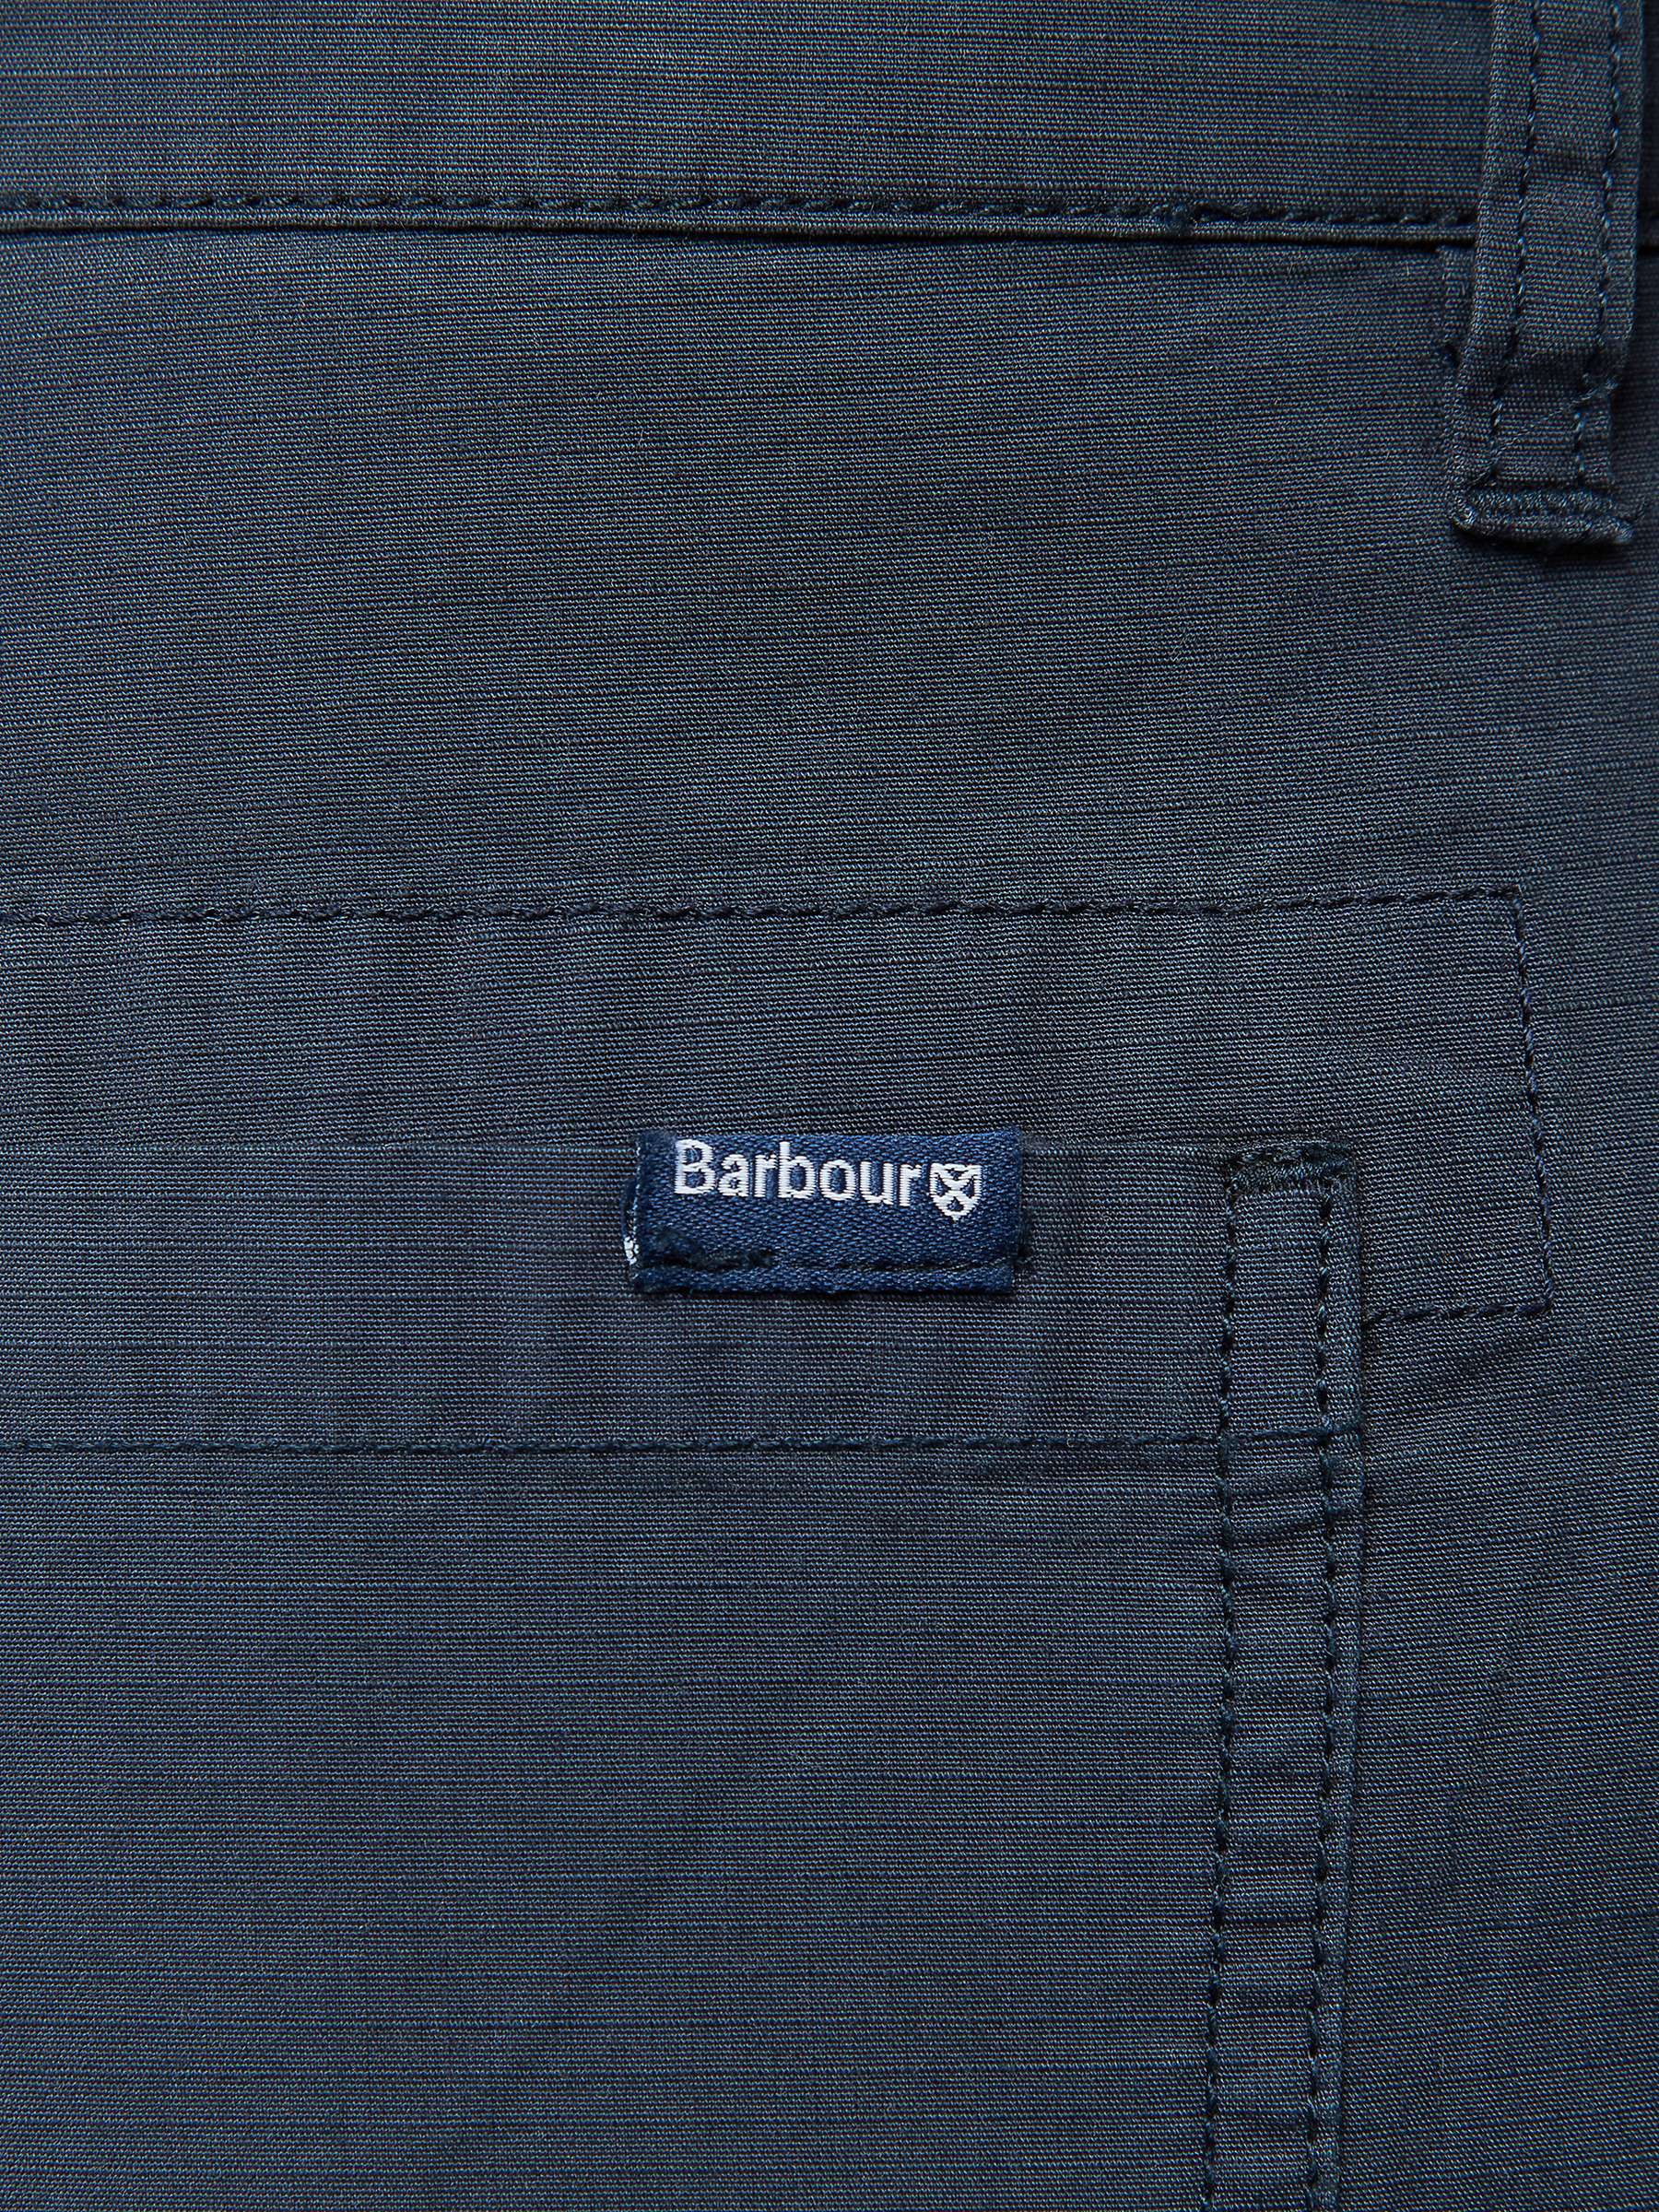 Buy Barbour Essential Ripstop Cargo Trousers, Navy Online at johnlewis.com